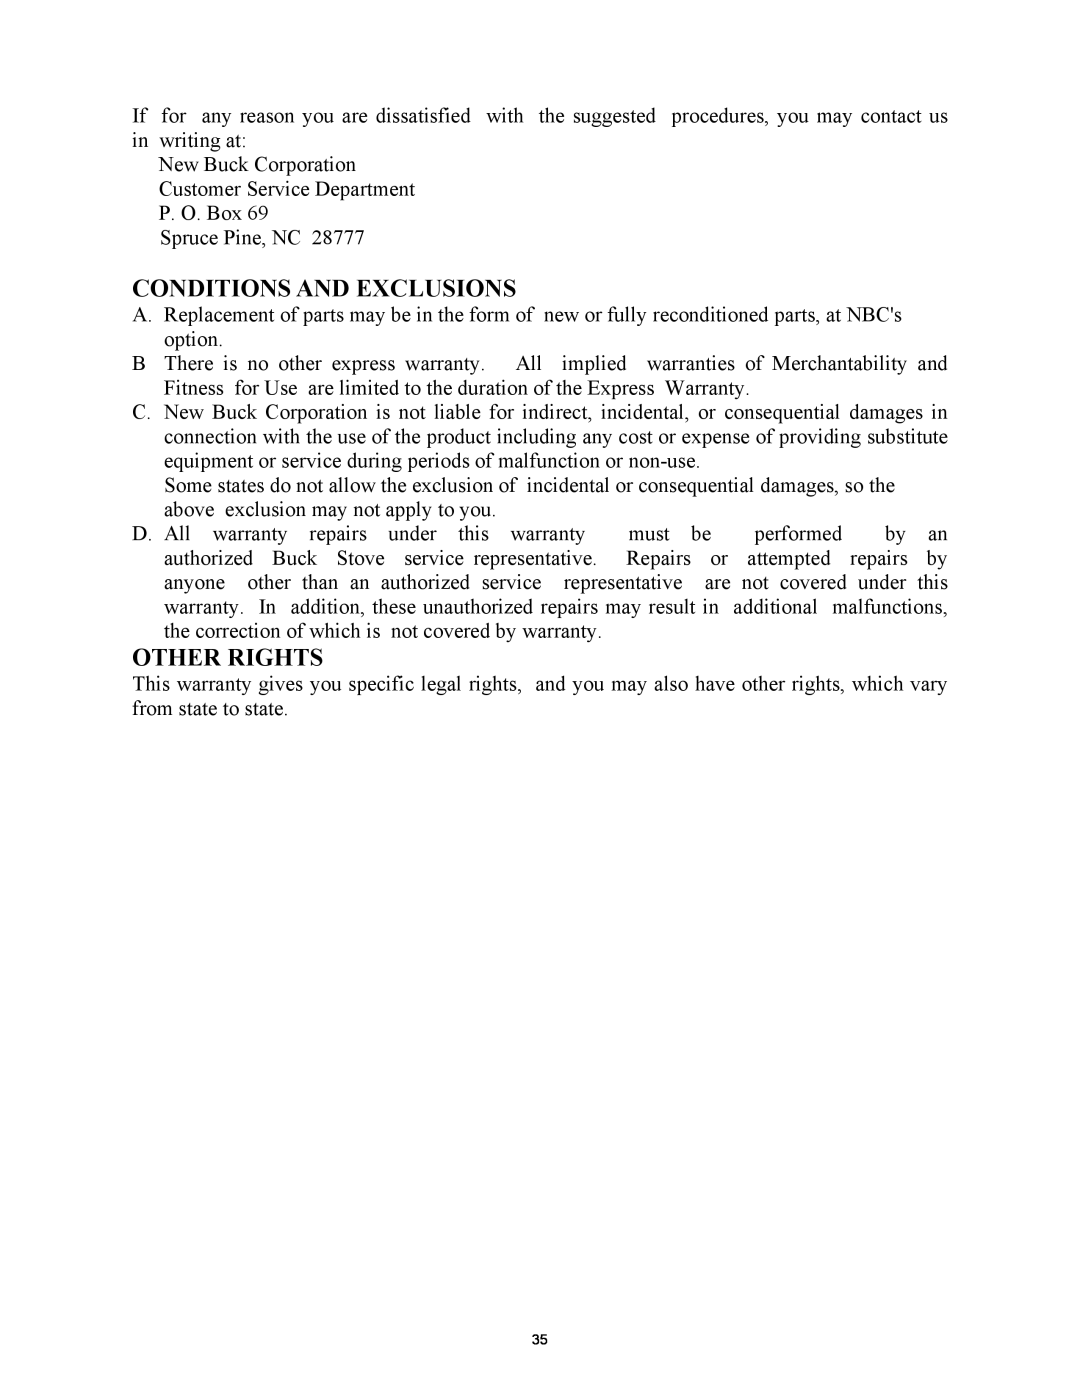 New Buck Corporation 74 installation instructions Conditions And Exclusions, Other Rights 